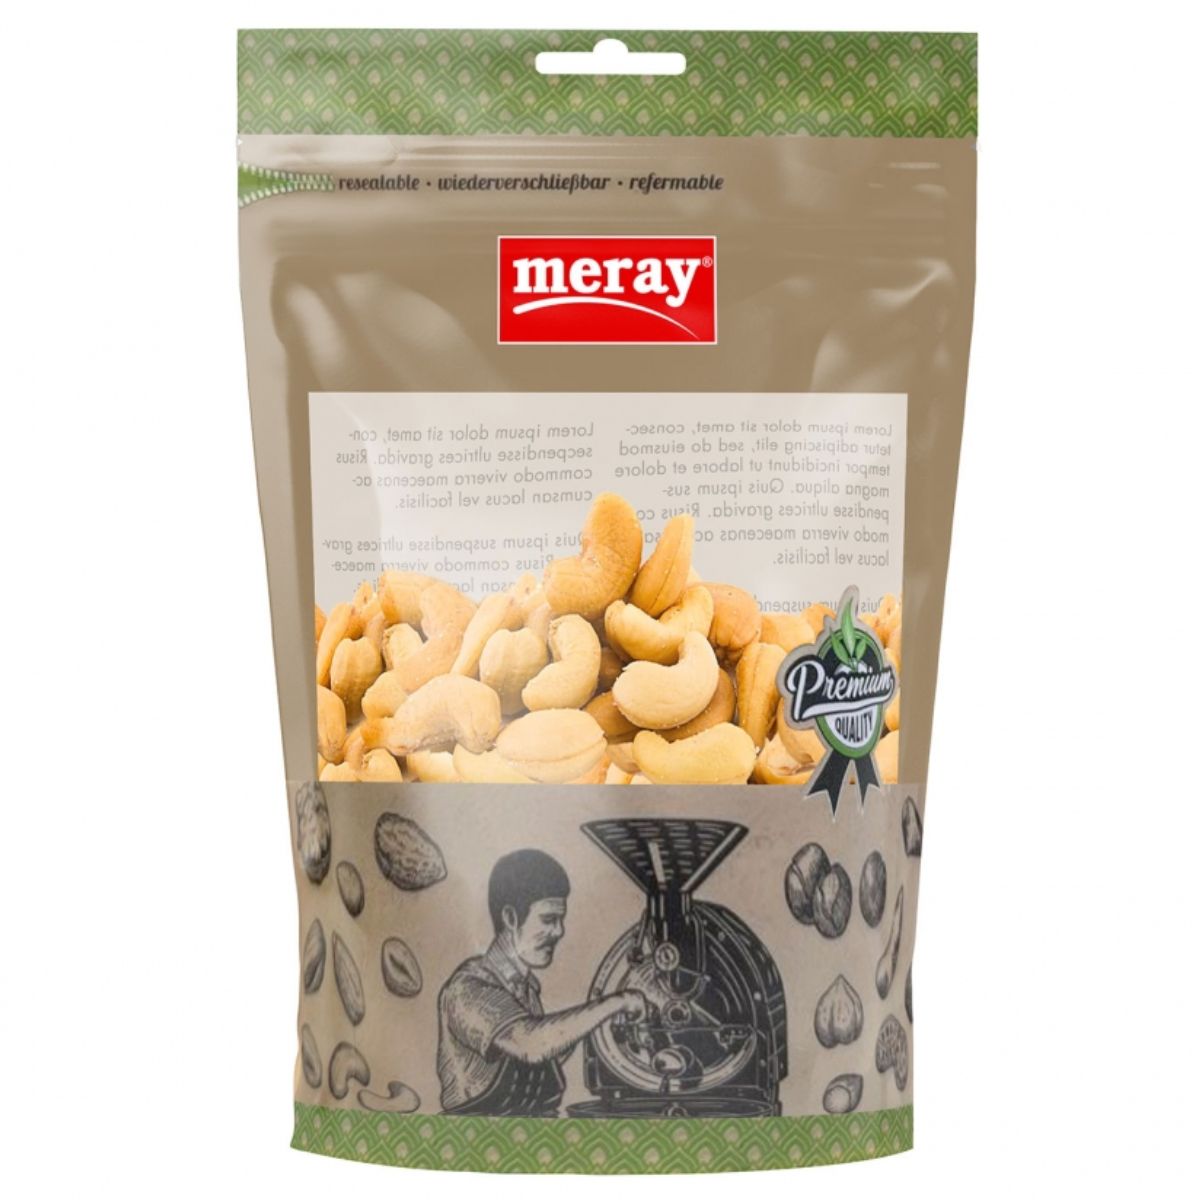 Meray - Cashew Kernals Roasted and Salted - 150g in a bag on a white background.